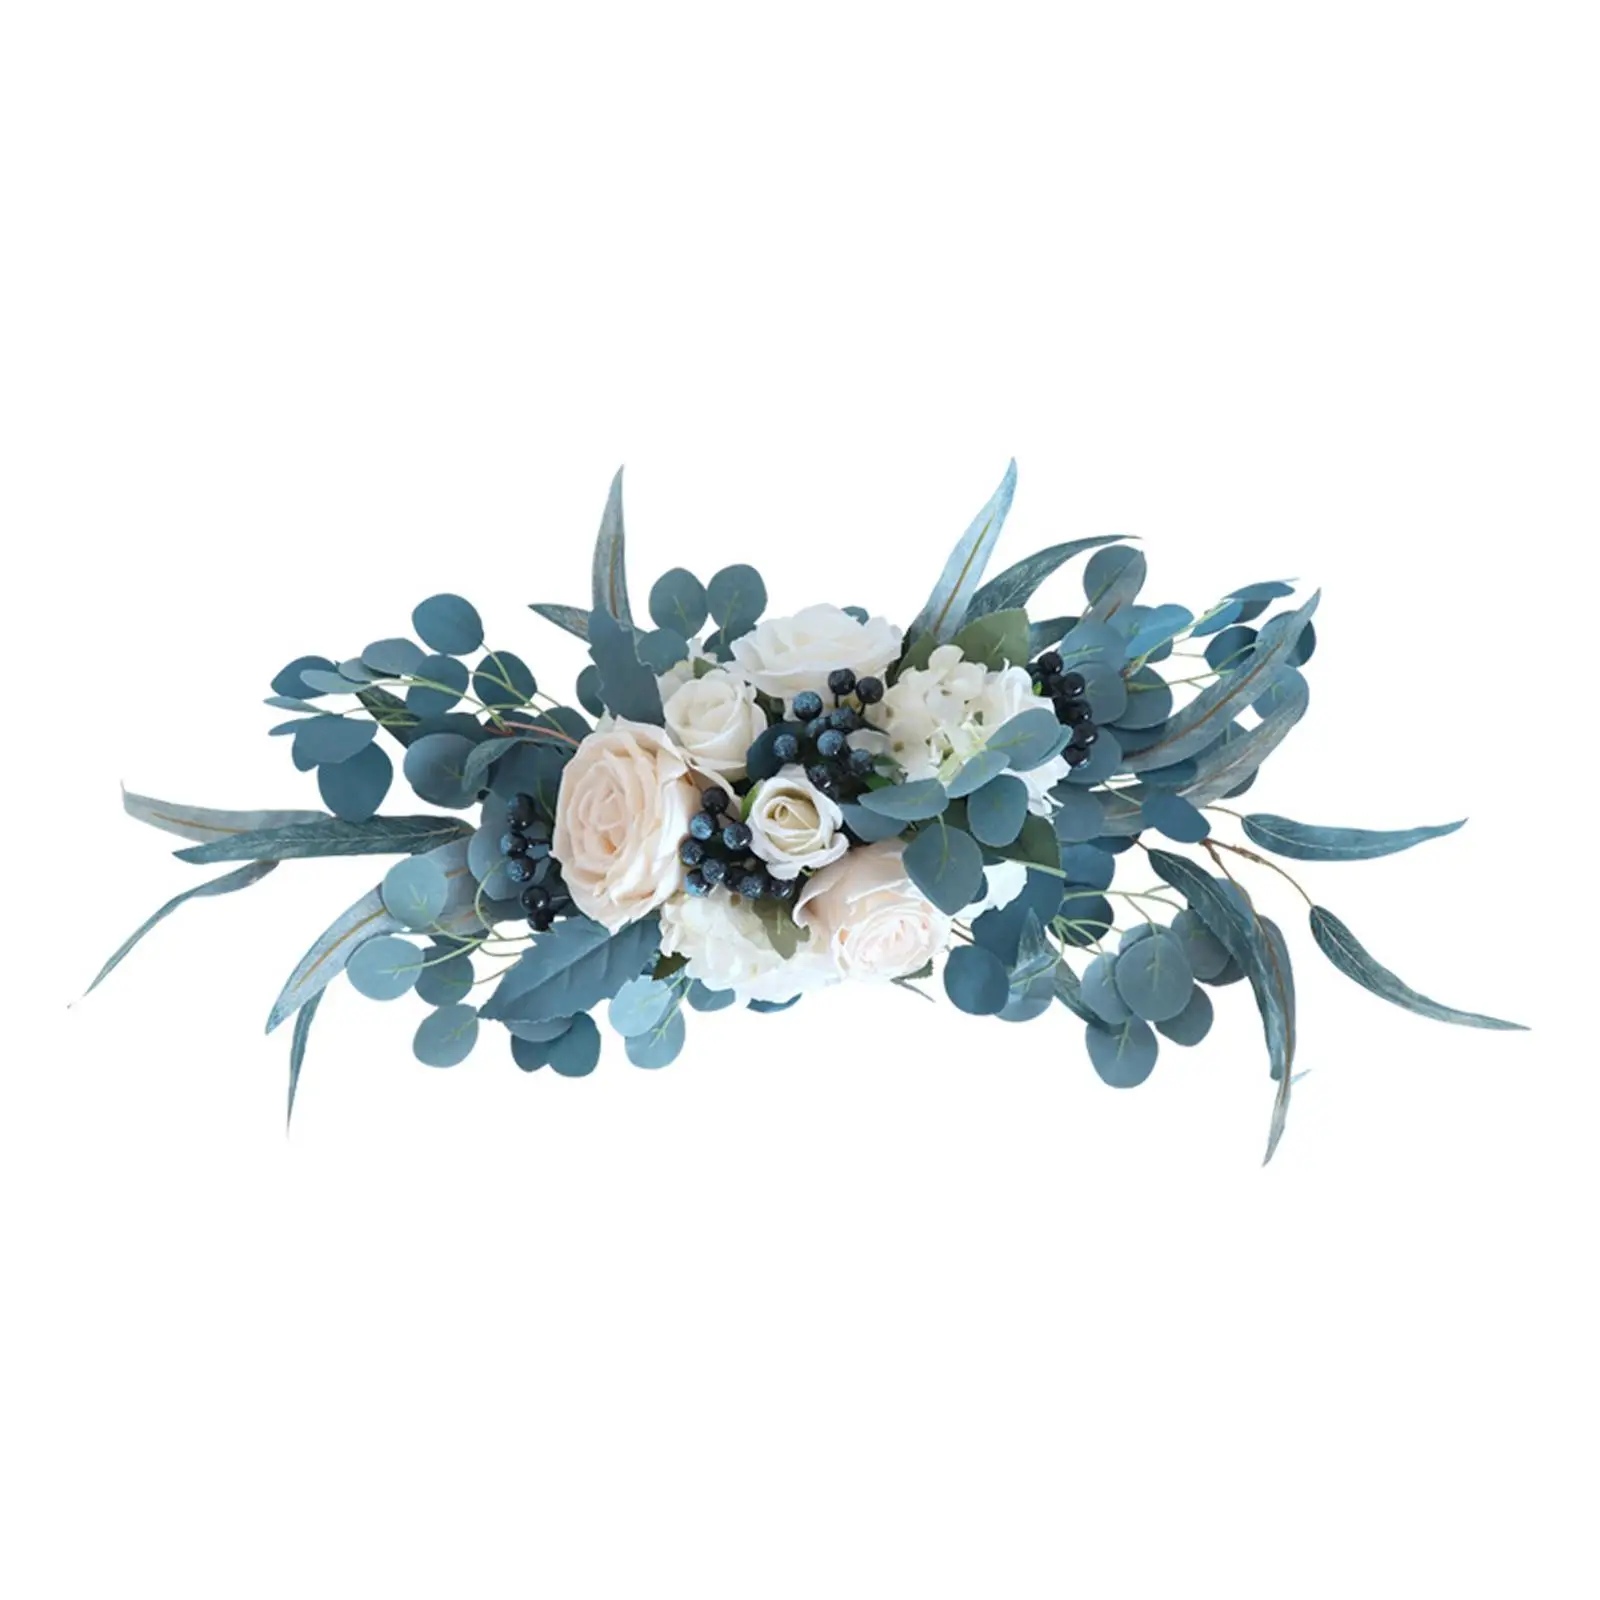 Farmhouse Artificial Flowers Arch Decor Centerpiece Garland Silk Flower Floral Swags for Holiday Window Bedroom Wall Decor